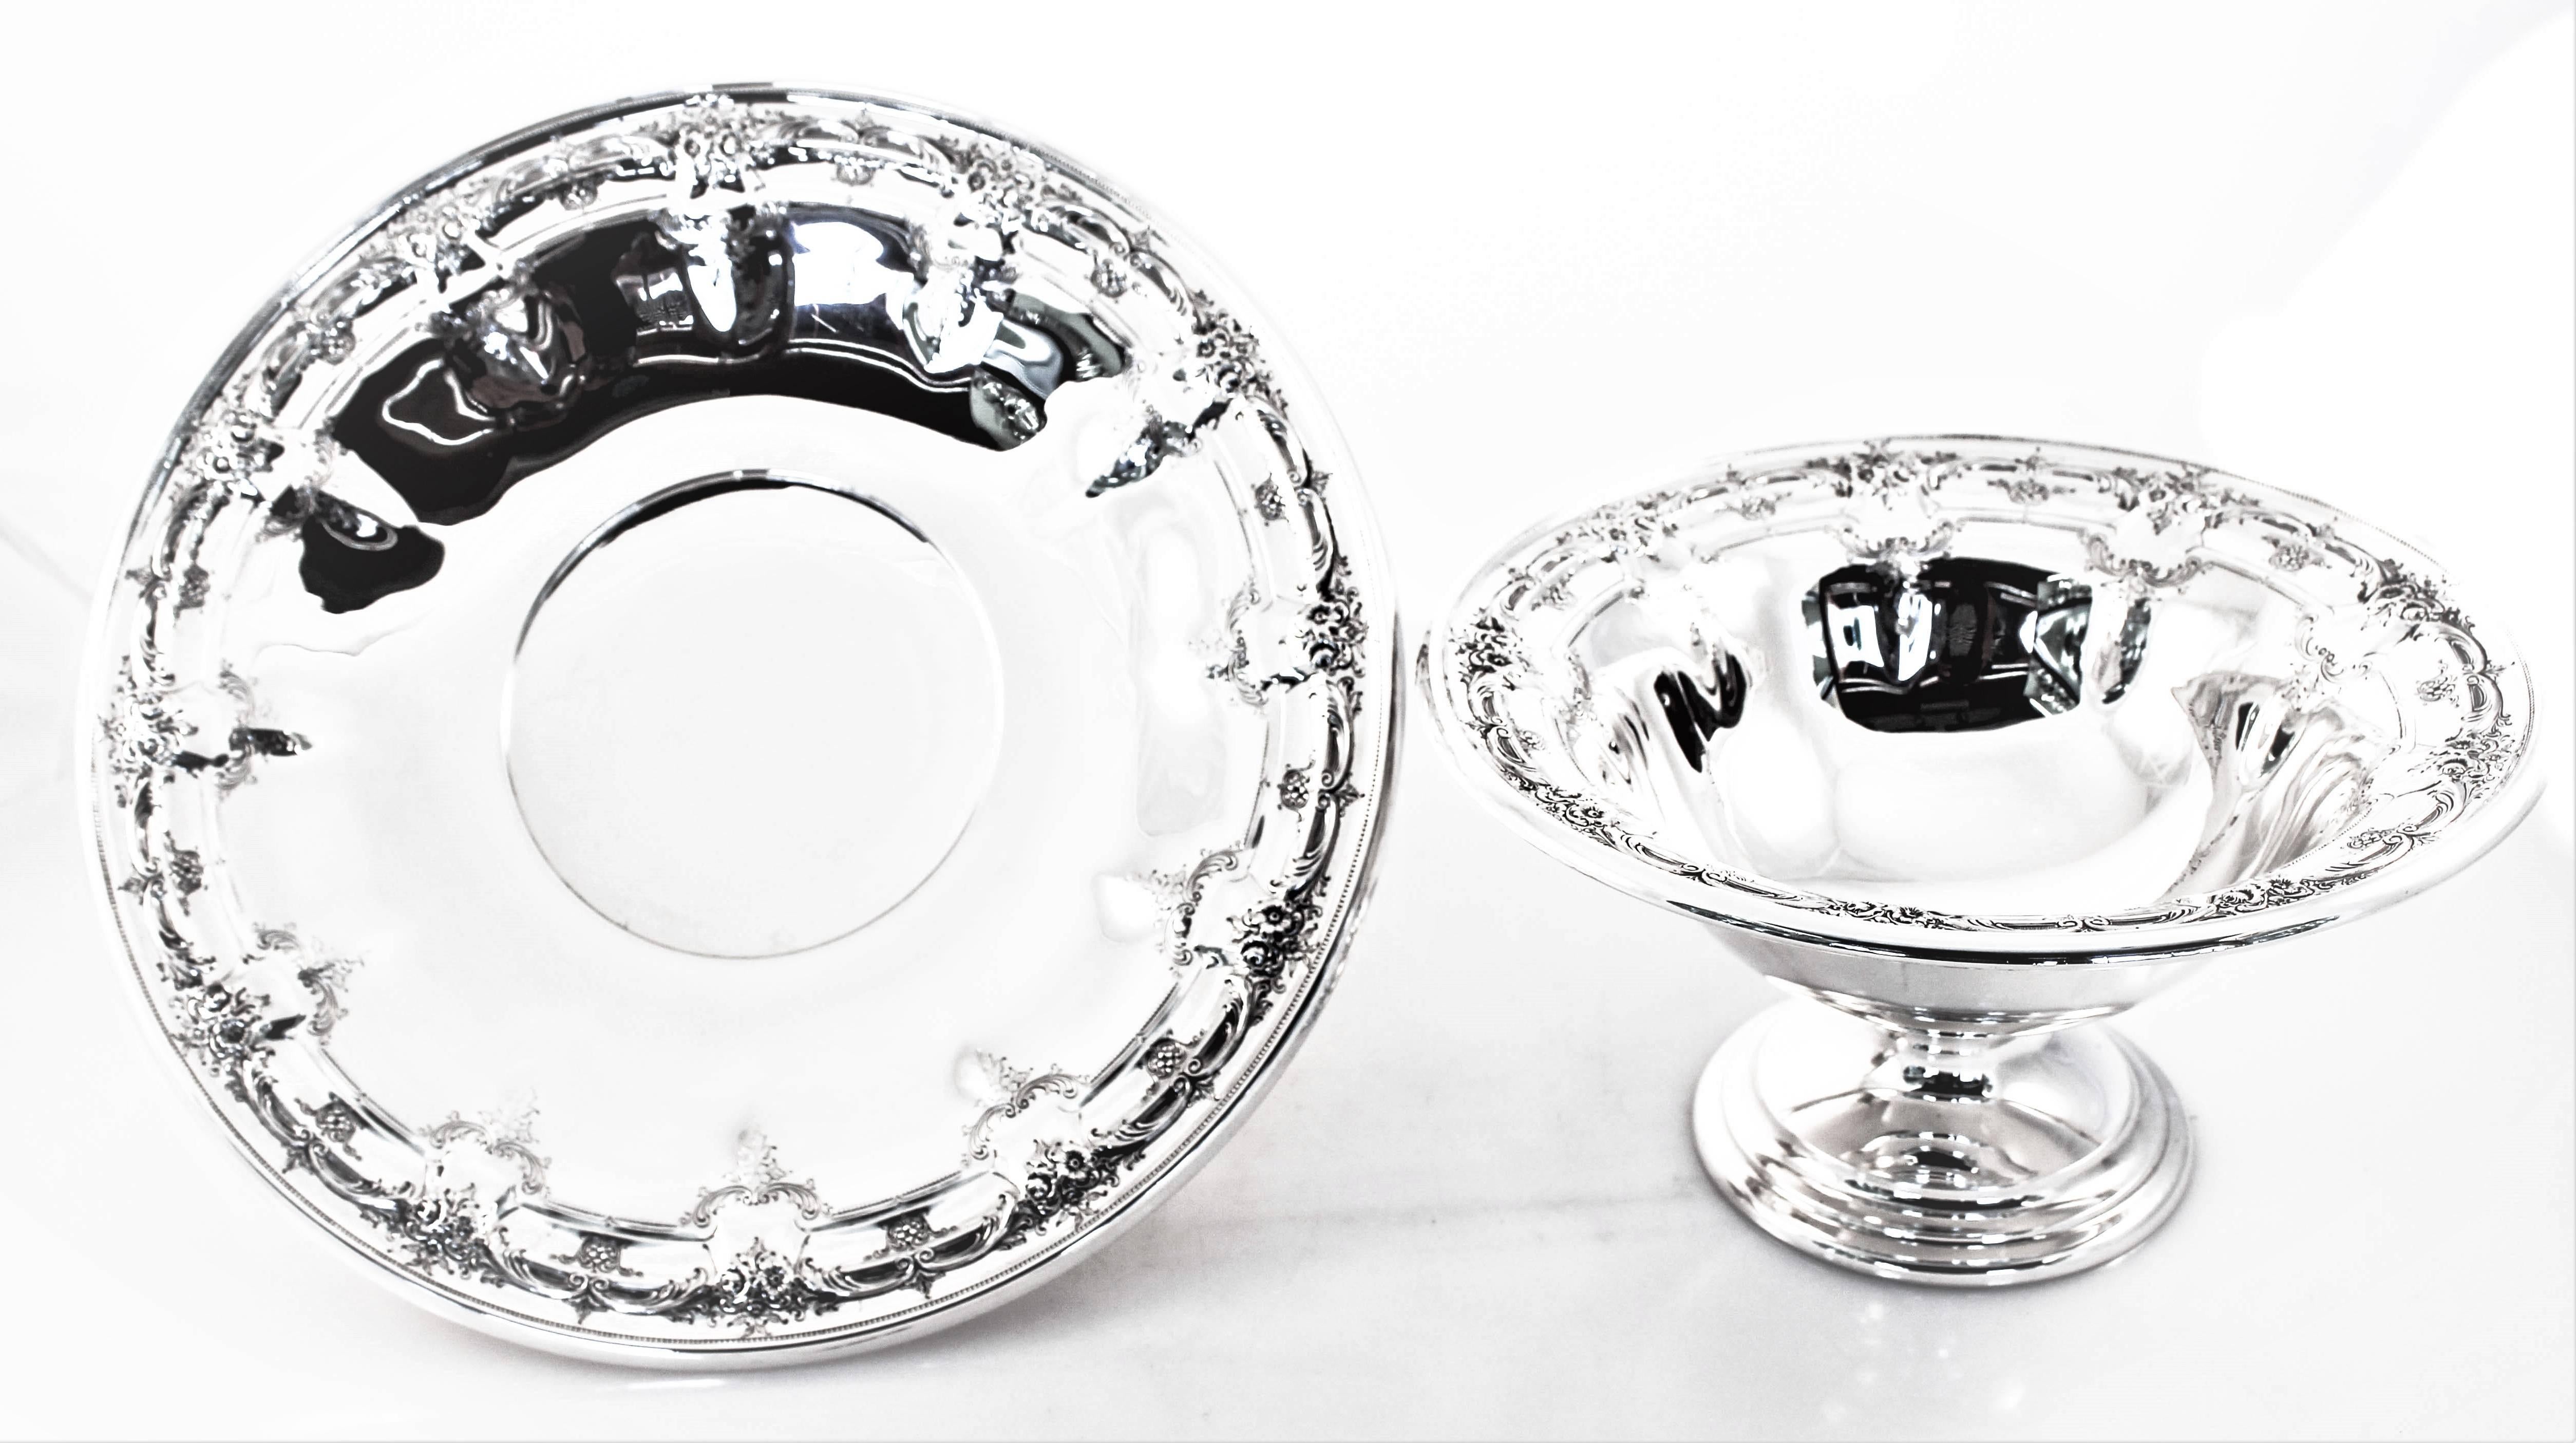 This fabulous duo is yours for the taking. A large tray on pedestal and the matching bowl on a pedestal. Used together or separately there is so many functions. For example, fill the bowl with grapes and put hors d’oeuvres around the tray or you can